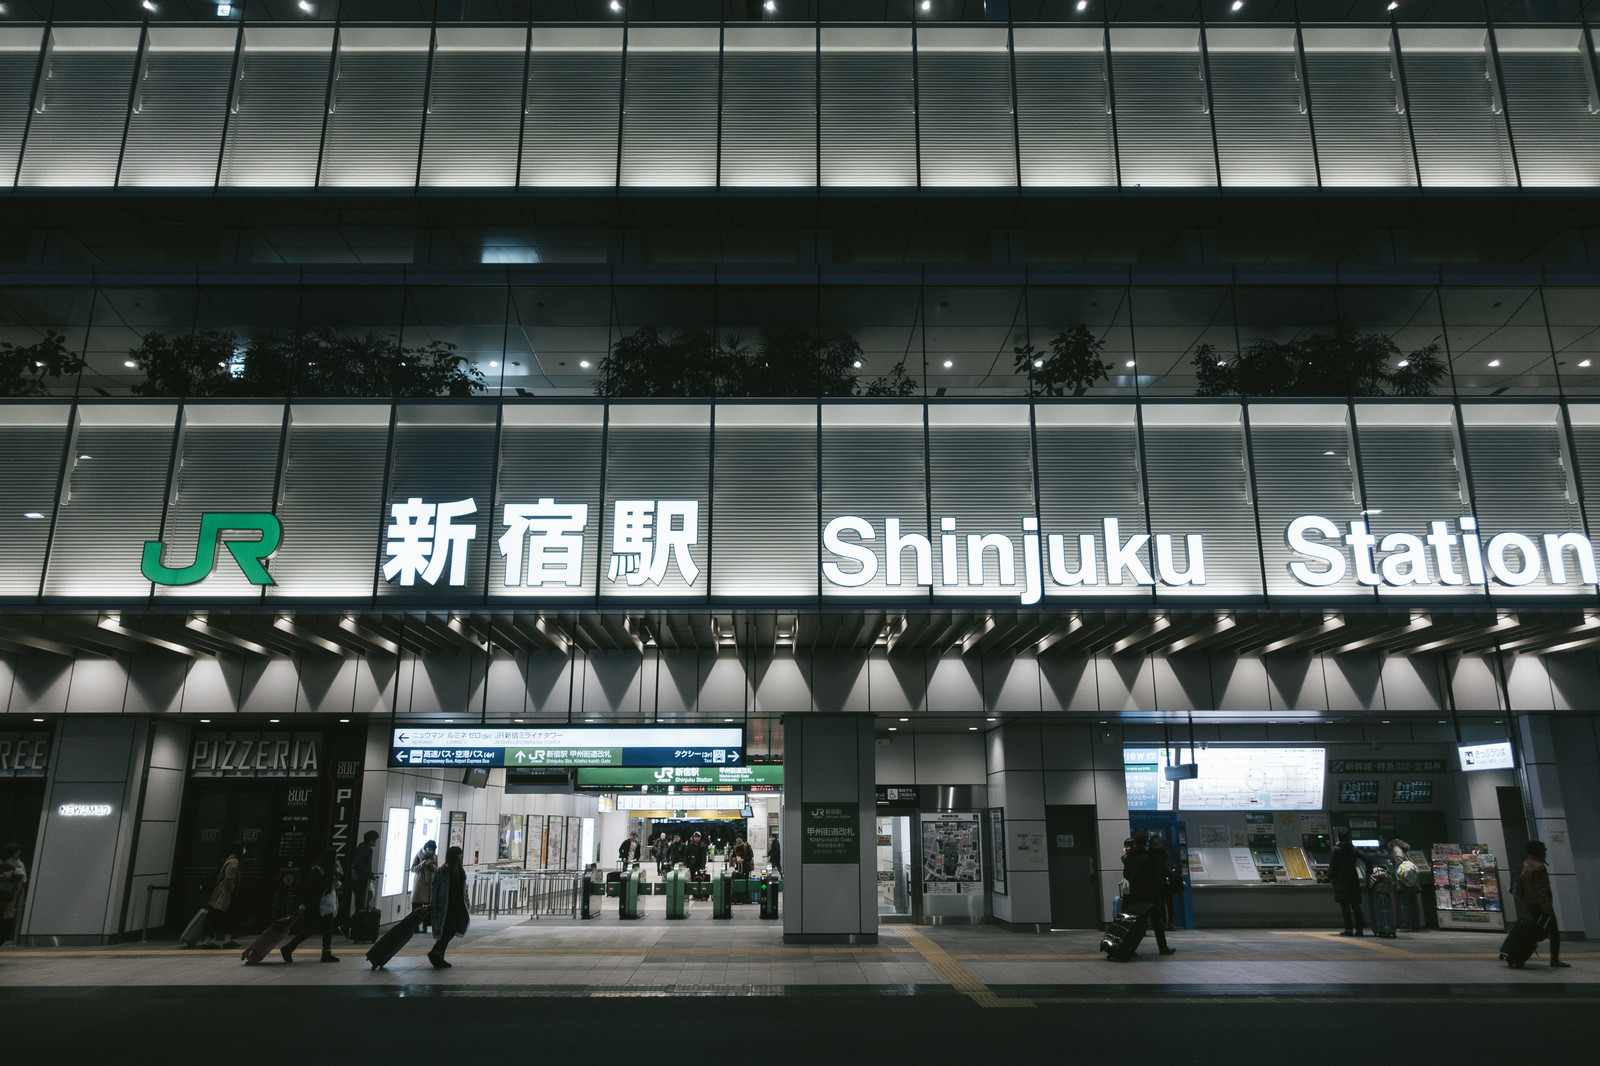 Crazy Photo Shows How Tokyo S Shinjuku Station Can Be As Confusing As A Video Game Dungeon Soranews24 Japan News